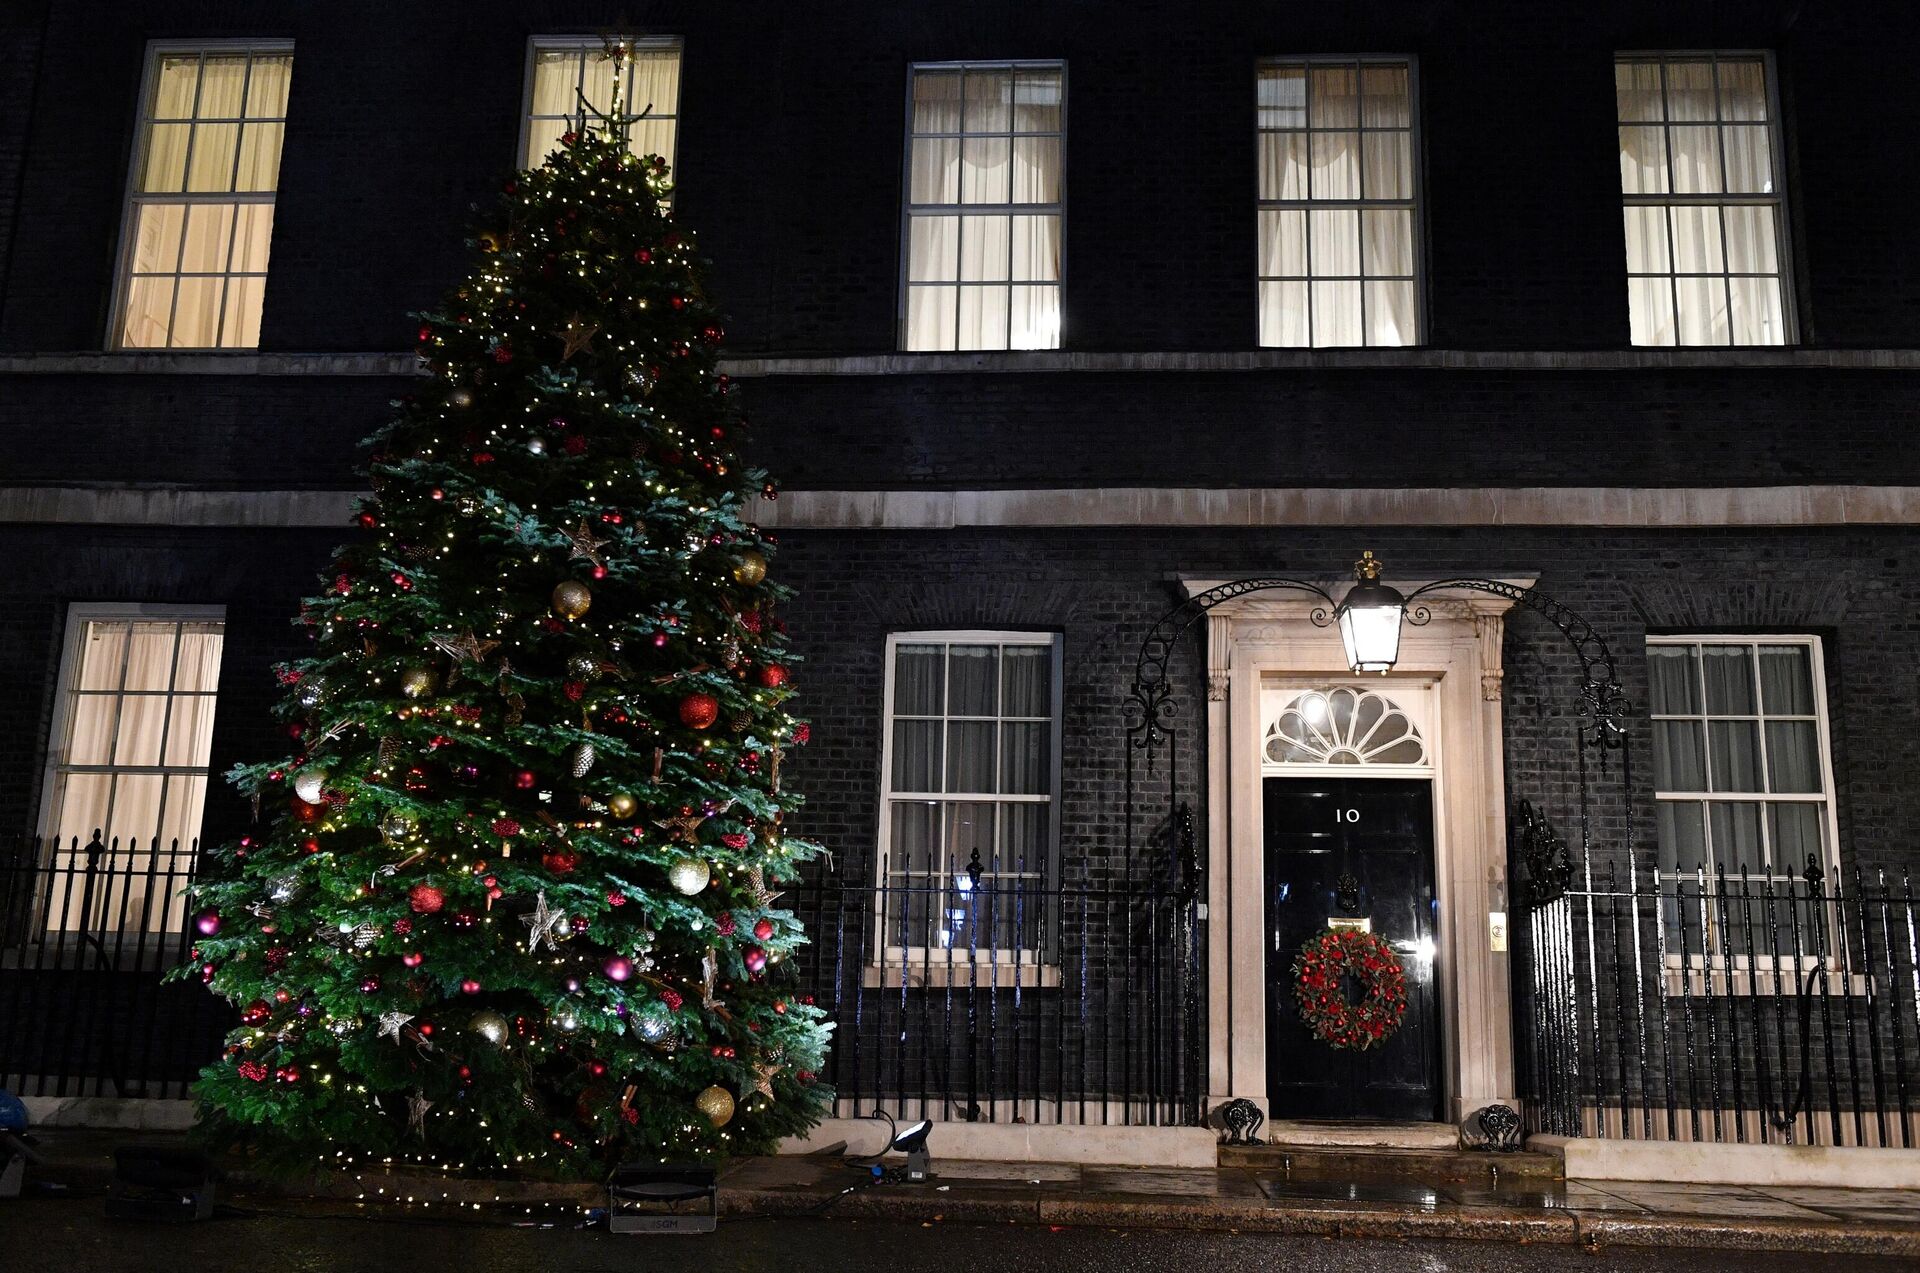 The annual Downing Street Christmas tree is pictured outside 10 Downing Street, in central London on December 1, 2021. (Photo by JUSTIN TALLIS / AFP) - Sputnik International, 1920, 09.12.2021